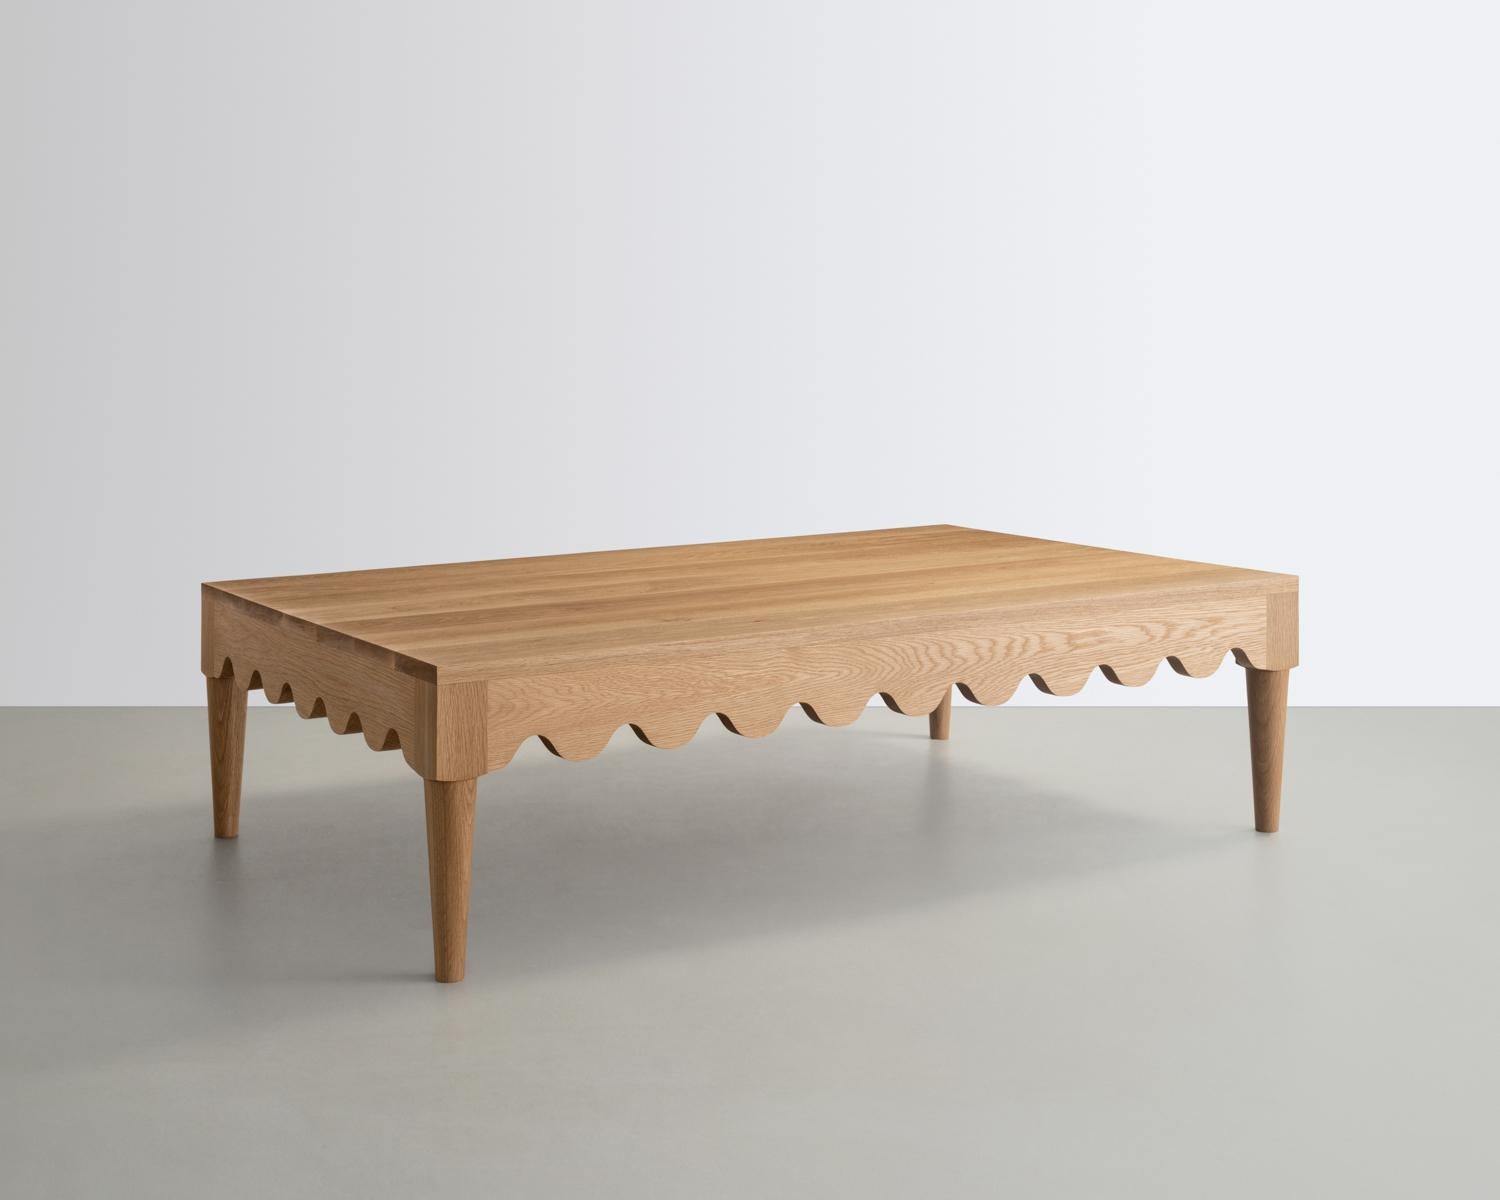 The Squiggle Coffee Table is constructed from solid Oak and features a playful detail that continues along its form. Its Surfaces are finished in a traditional black and white ceruse.
Inspired by the French Mid-century designer Jean Royère.